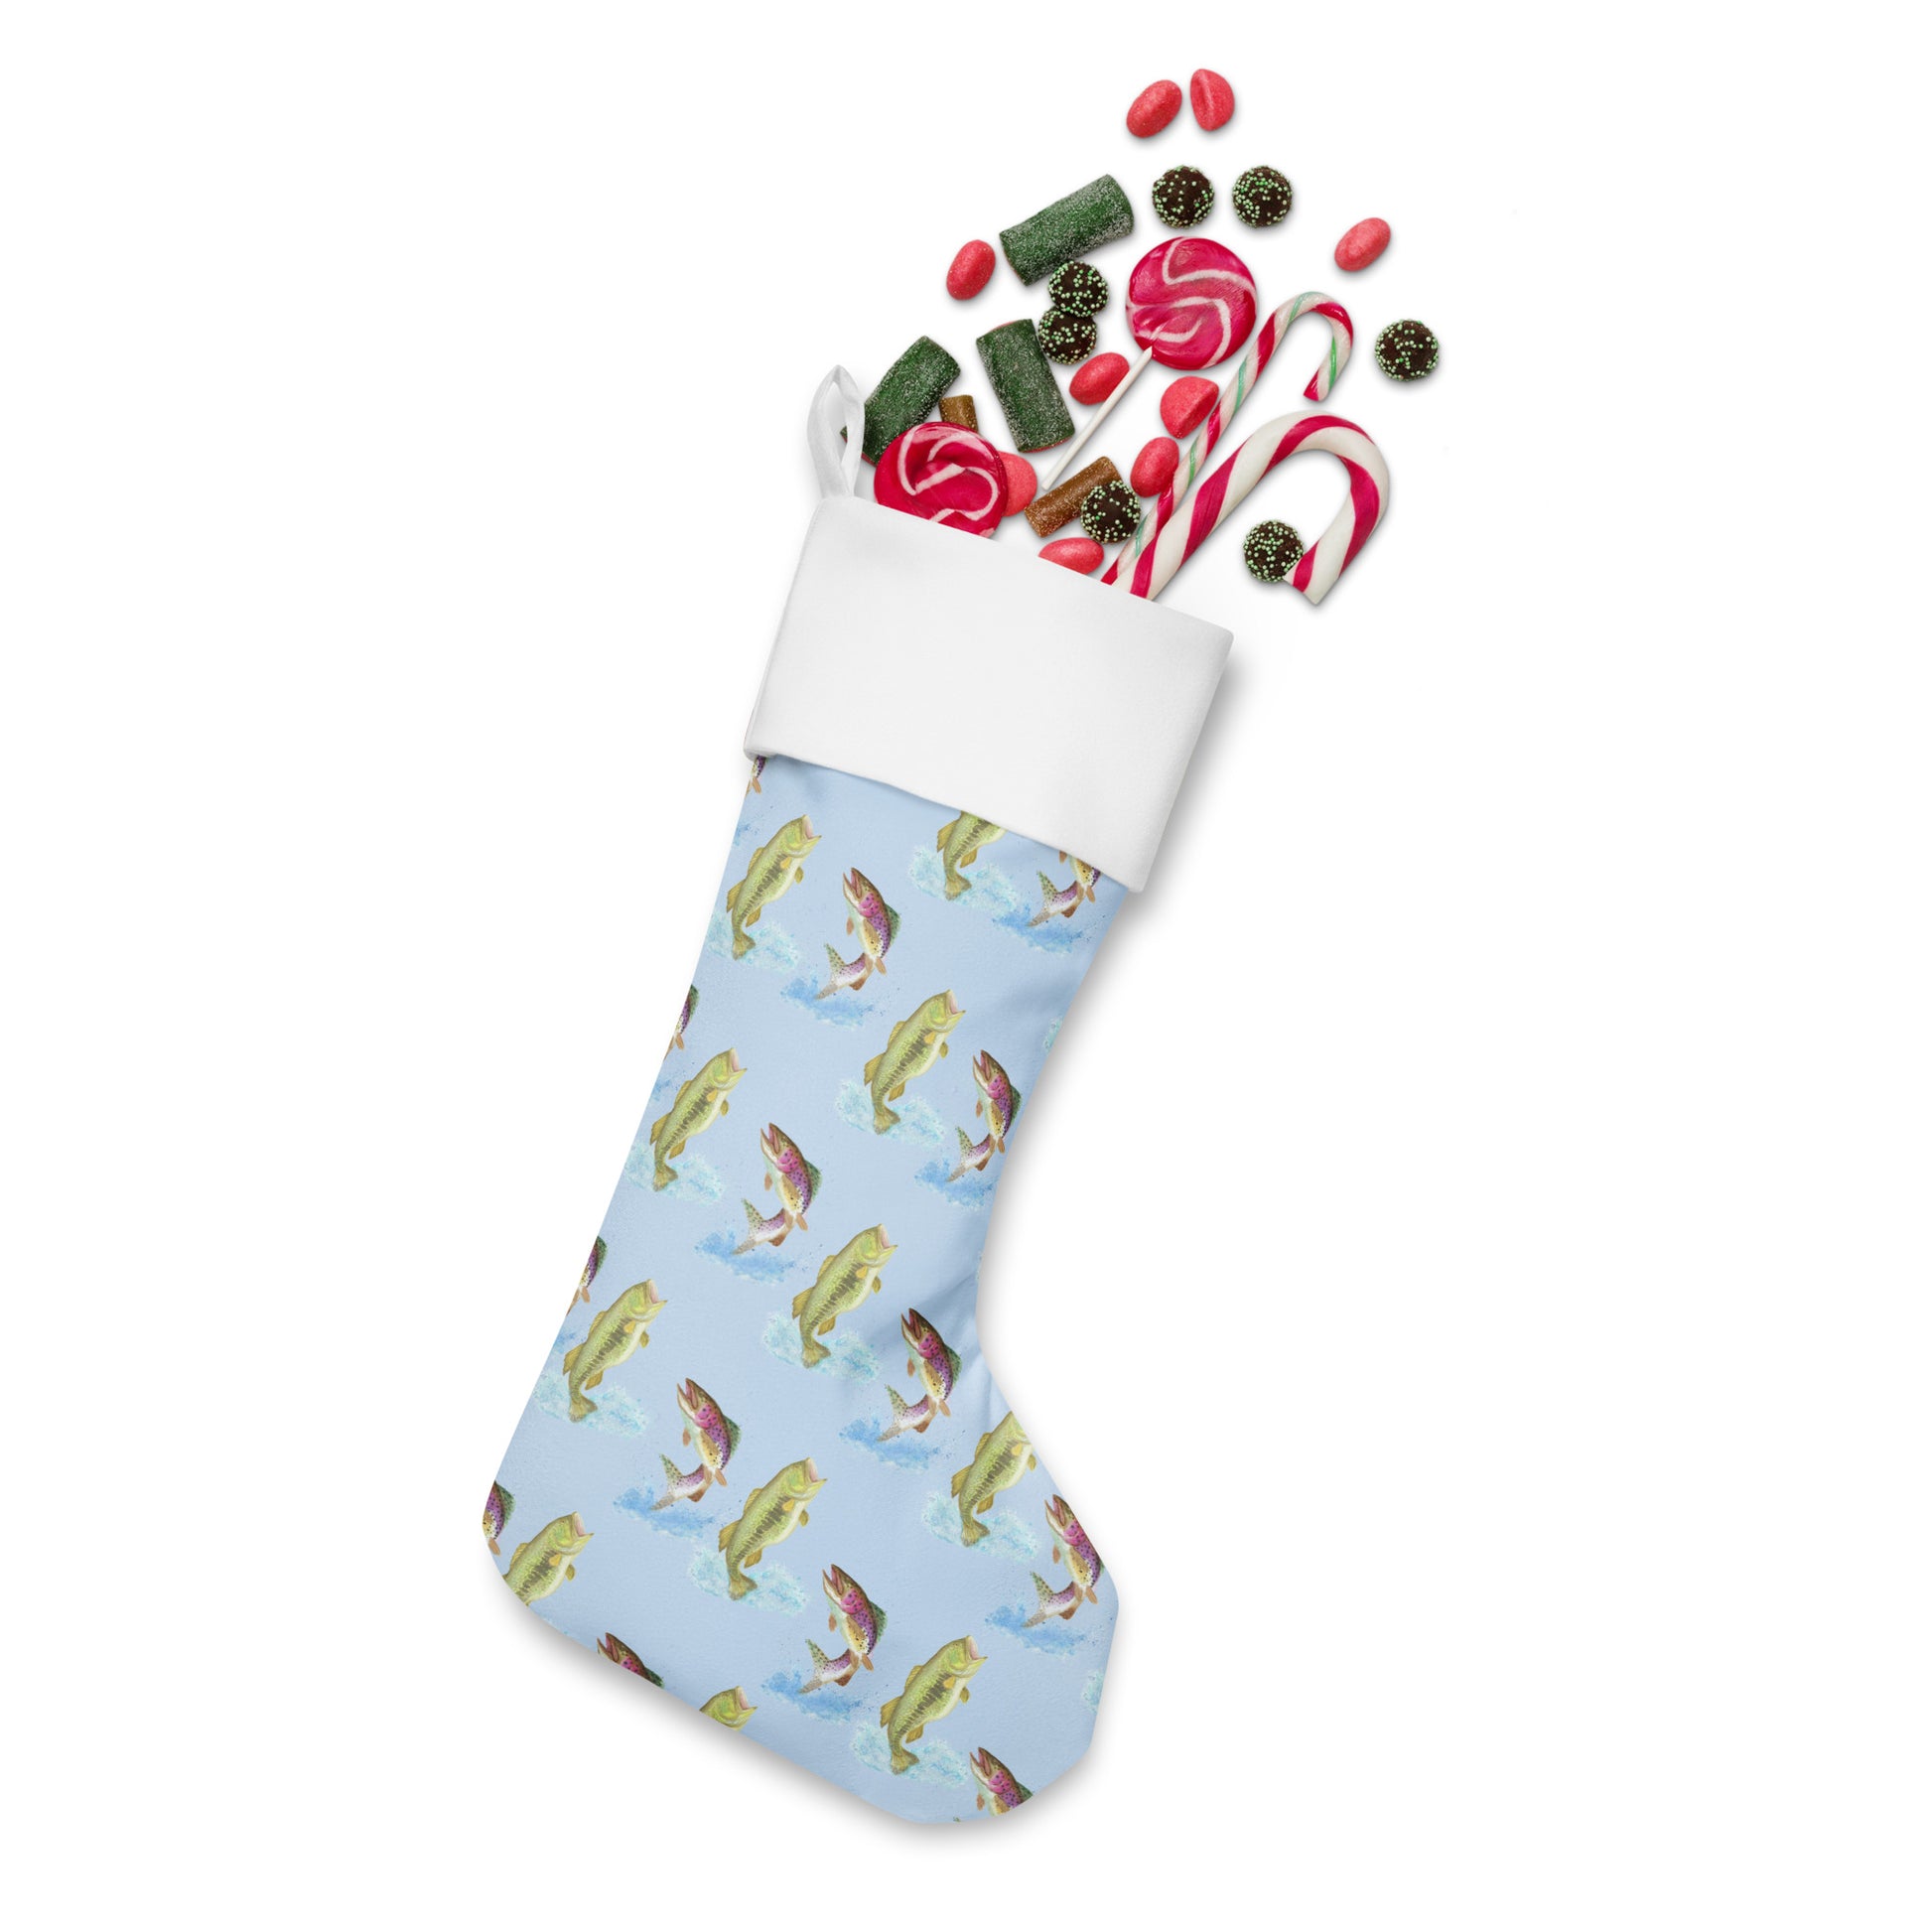 Limited Edition Blue Fishing Christmas Stocking.  7 by 18 inches. The front has watercolor rainbow trout and largemouth bass patterned on a blue background and an off-white polyester back fabric. It has a white fold-over cuff and a hanging loop. Shown stuffed with candy.